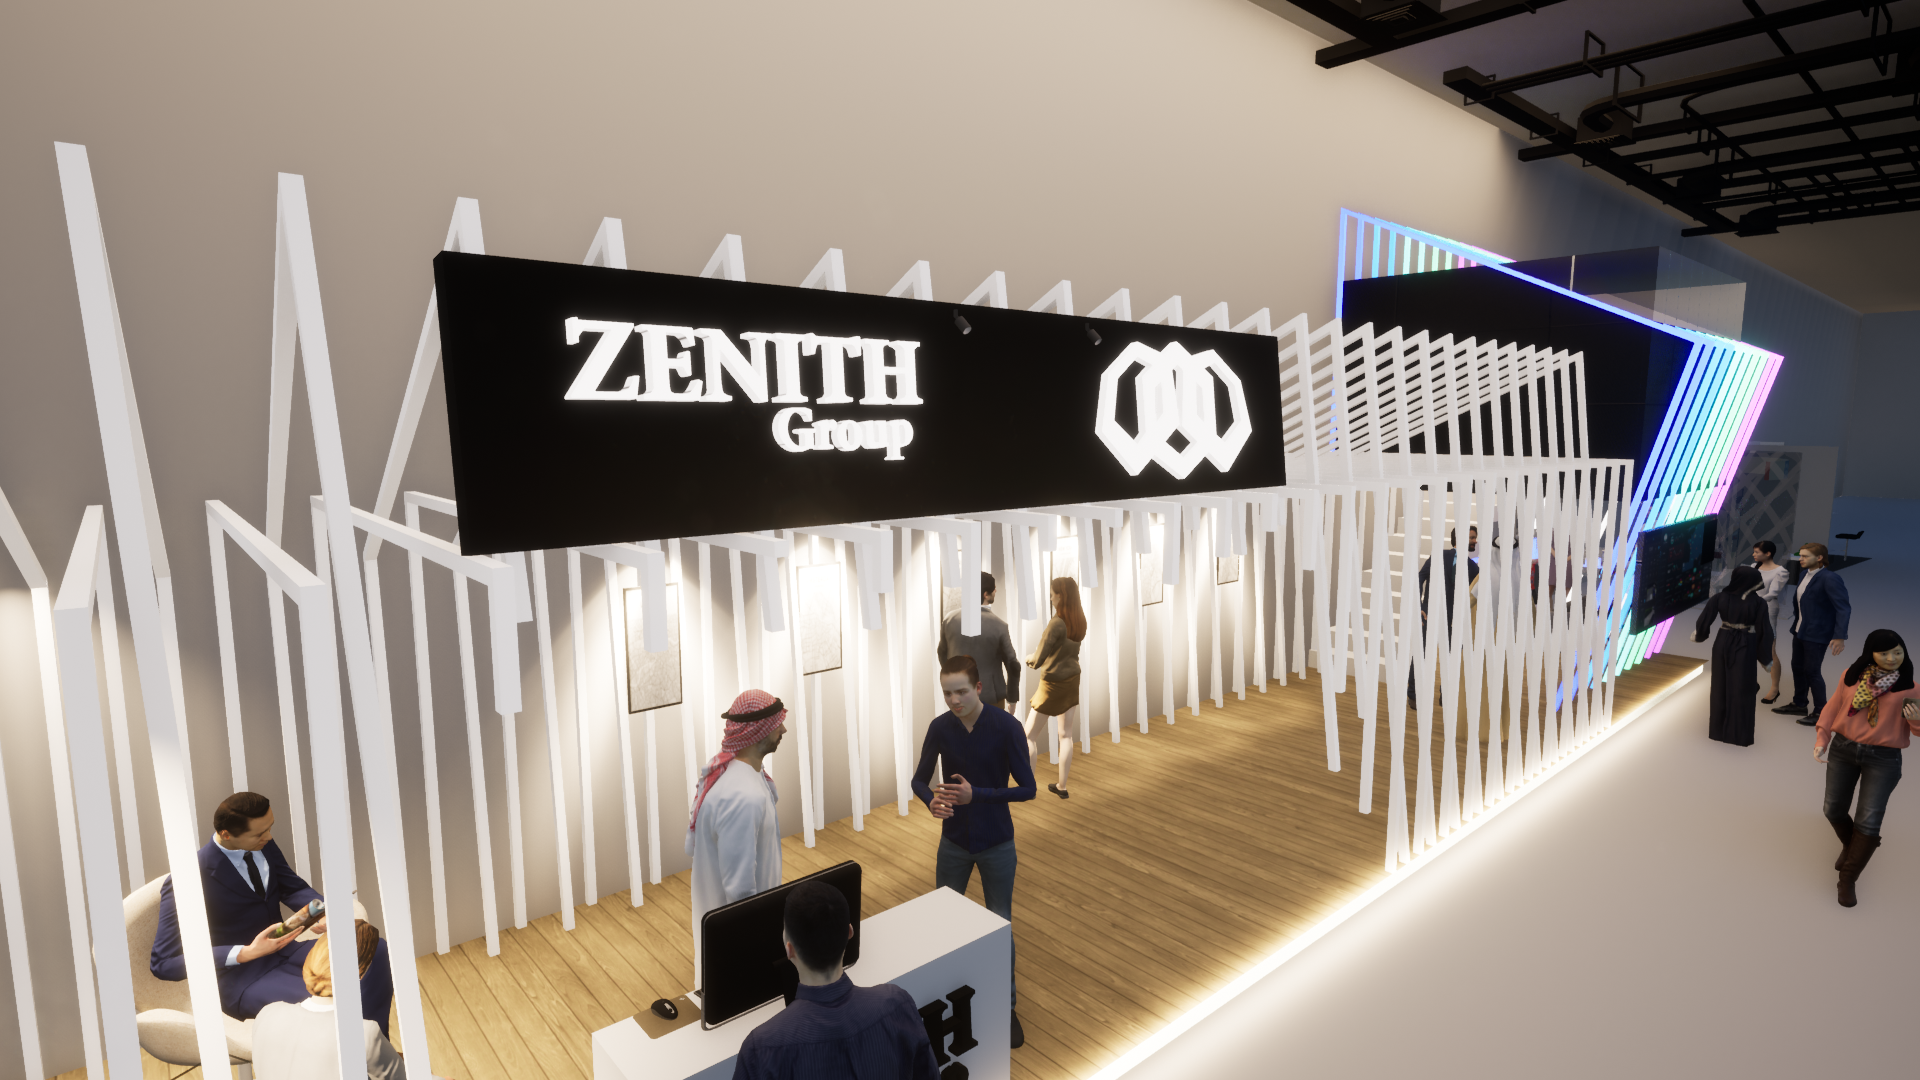 ZENITH Group Stand-Soodeh Abedini-Render (10)